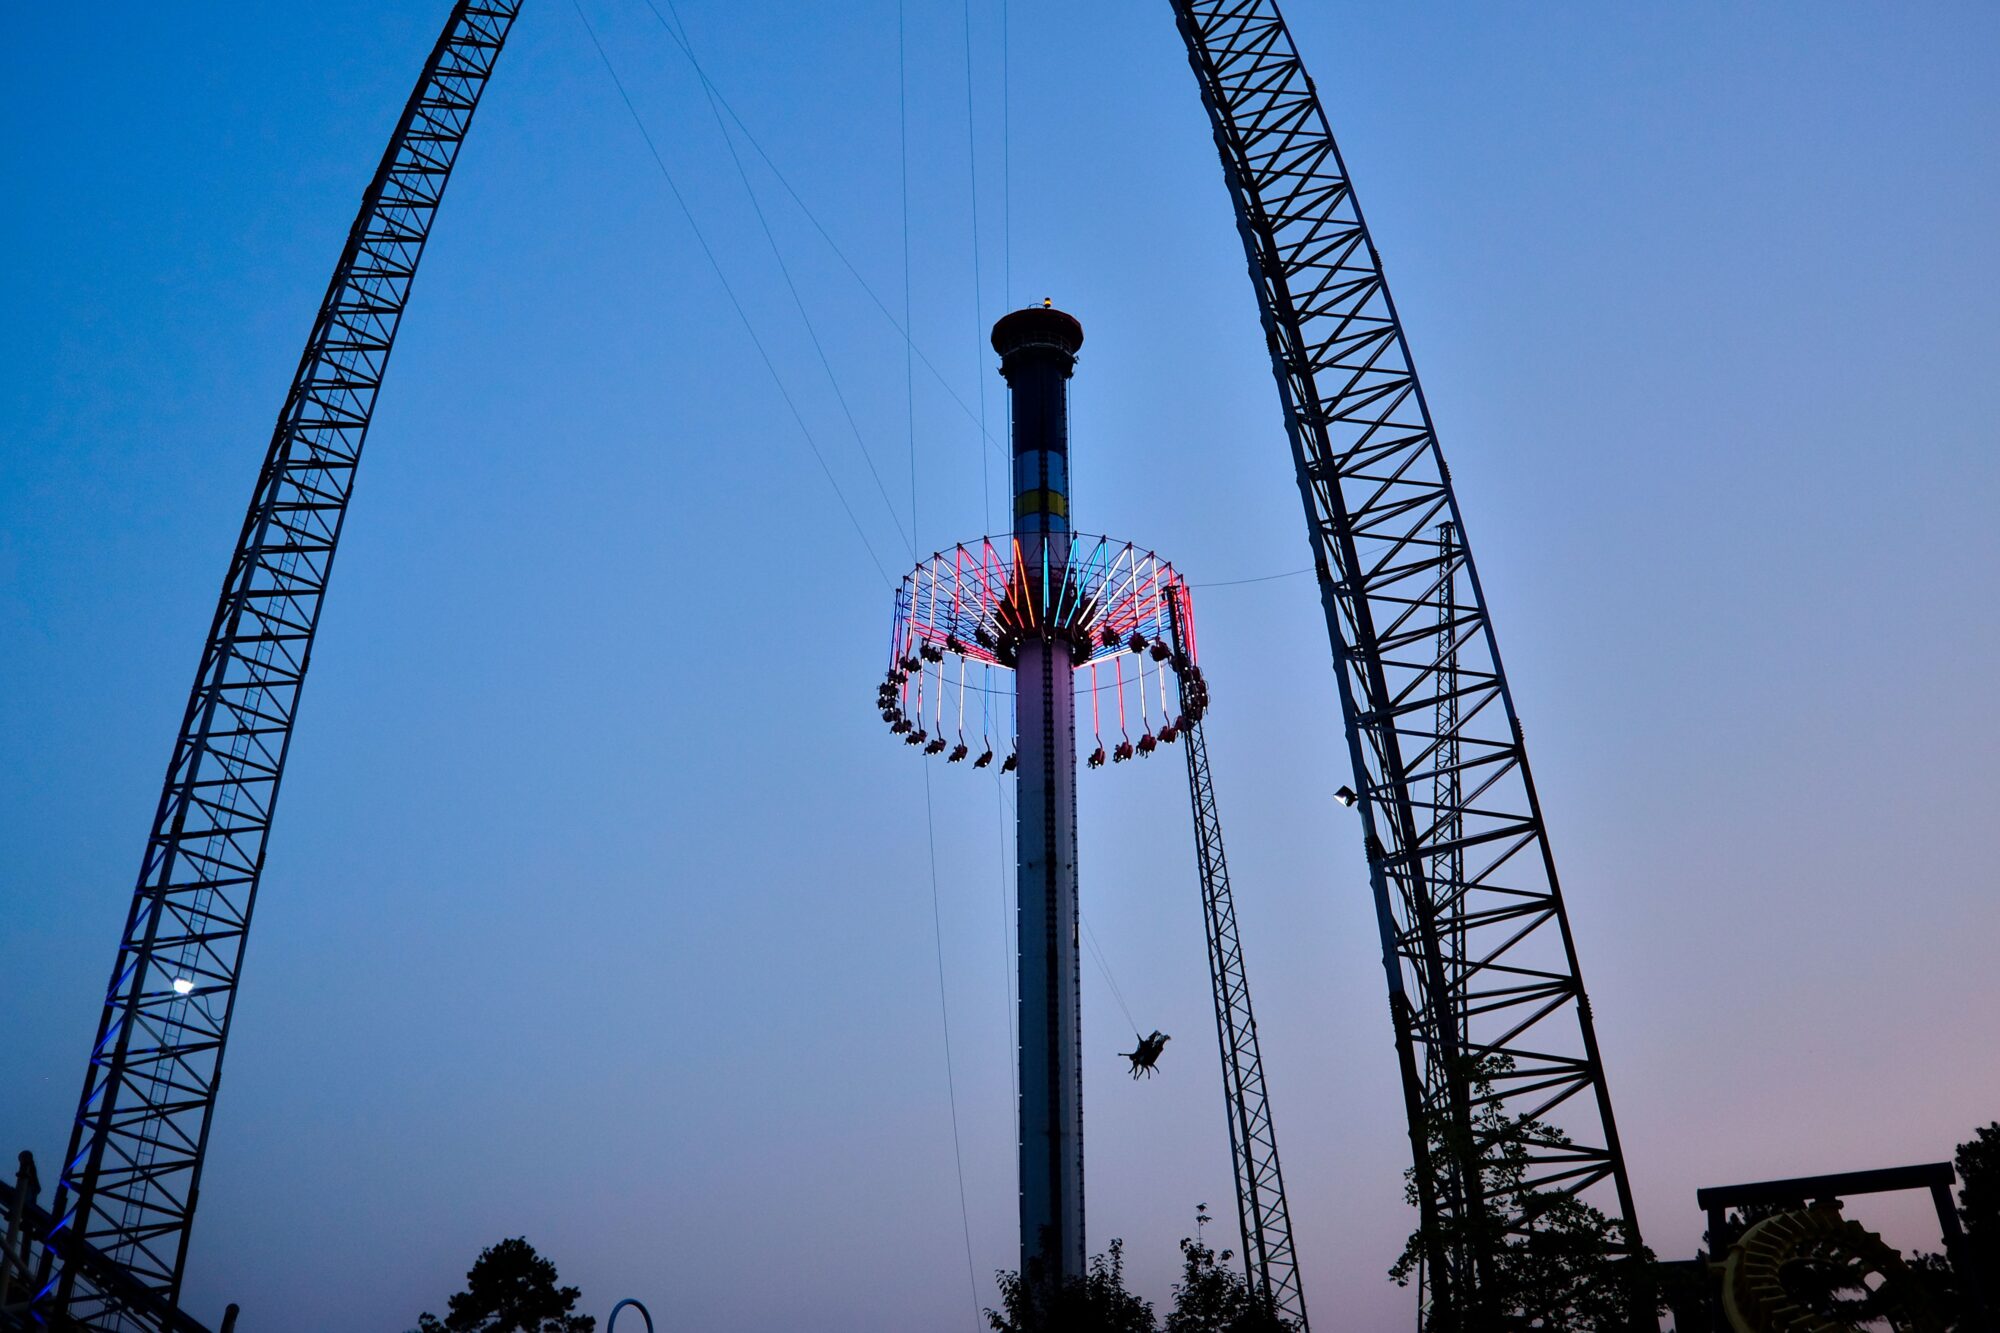 Several of Carowinds rides running simultaneously